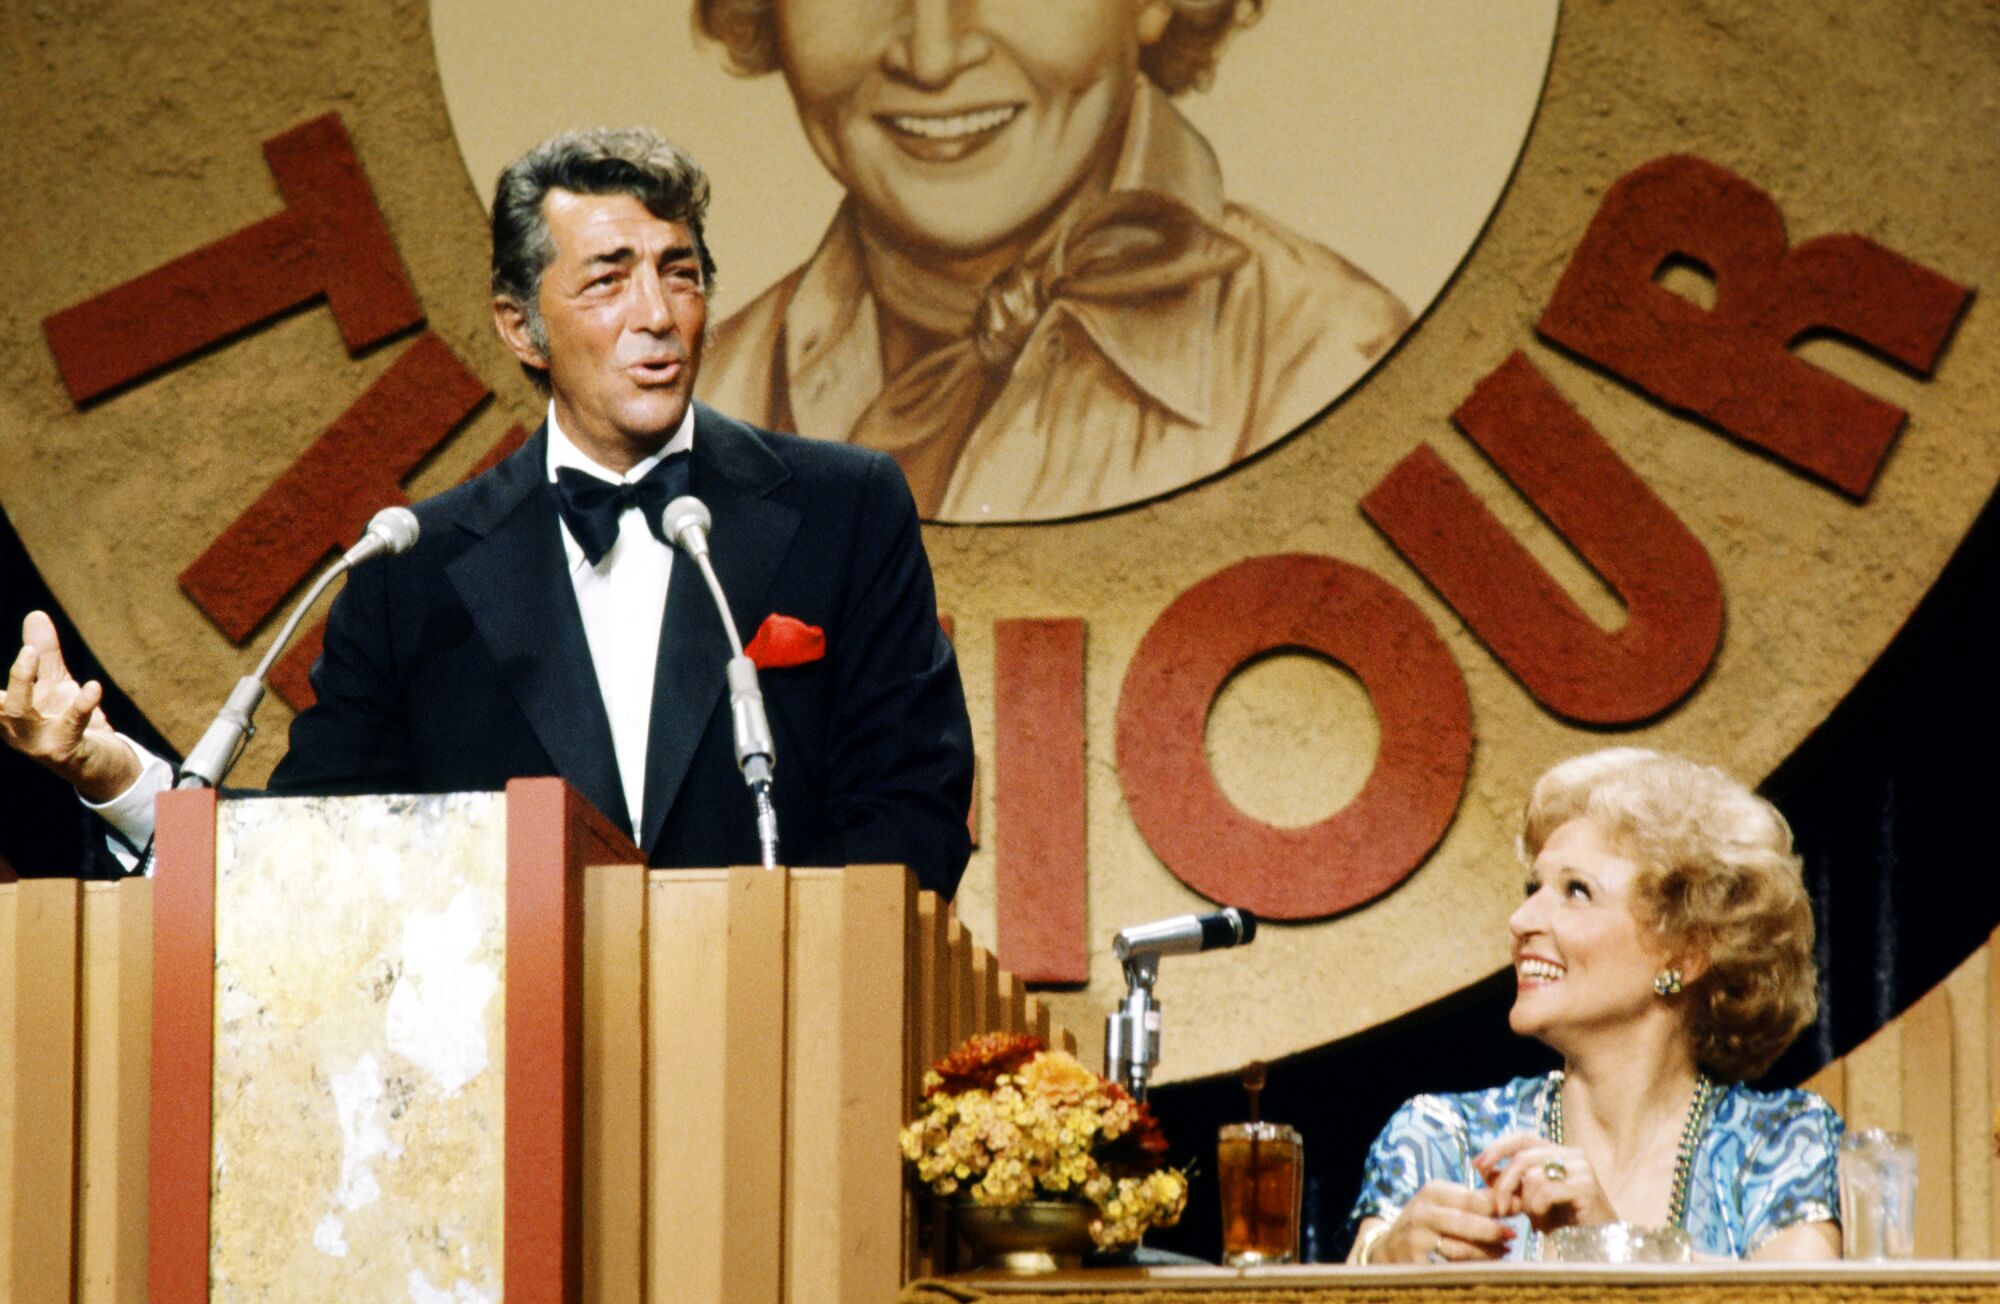 A man hosting a celebrity roast stands behind a podium as female roastee looks on from dais.